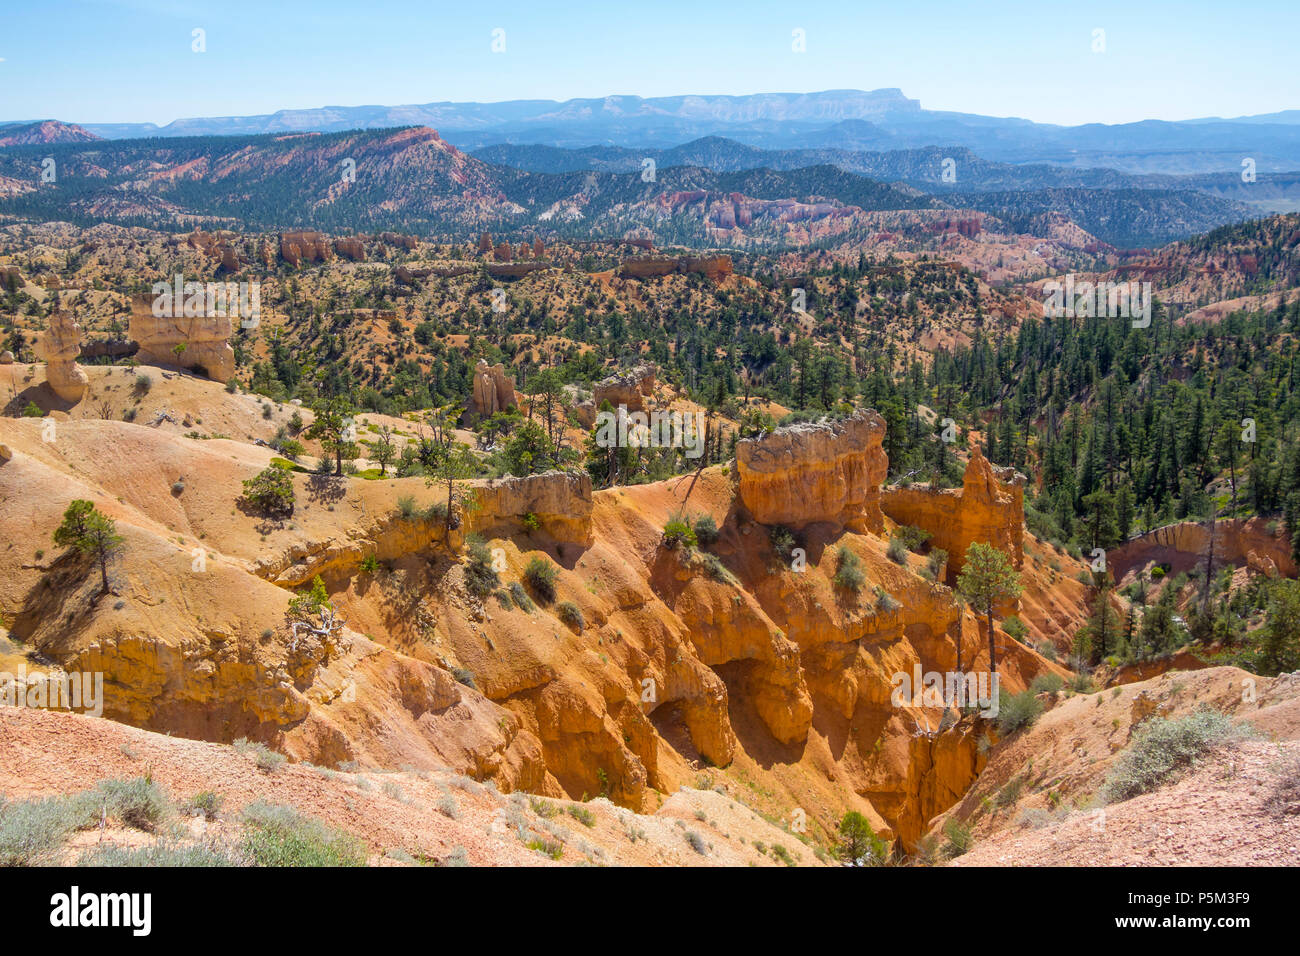 Amphitheatre at Bryce Canyon National Park showing colours of the sedimentary rocks formed by many years of erosion. Stock Photo